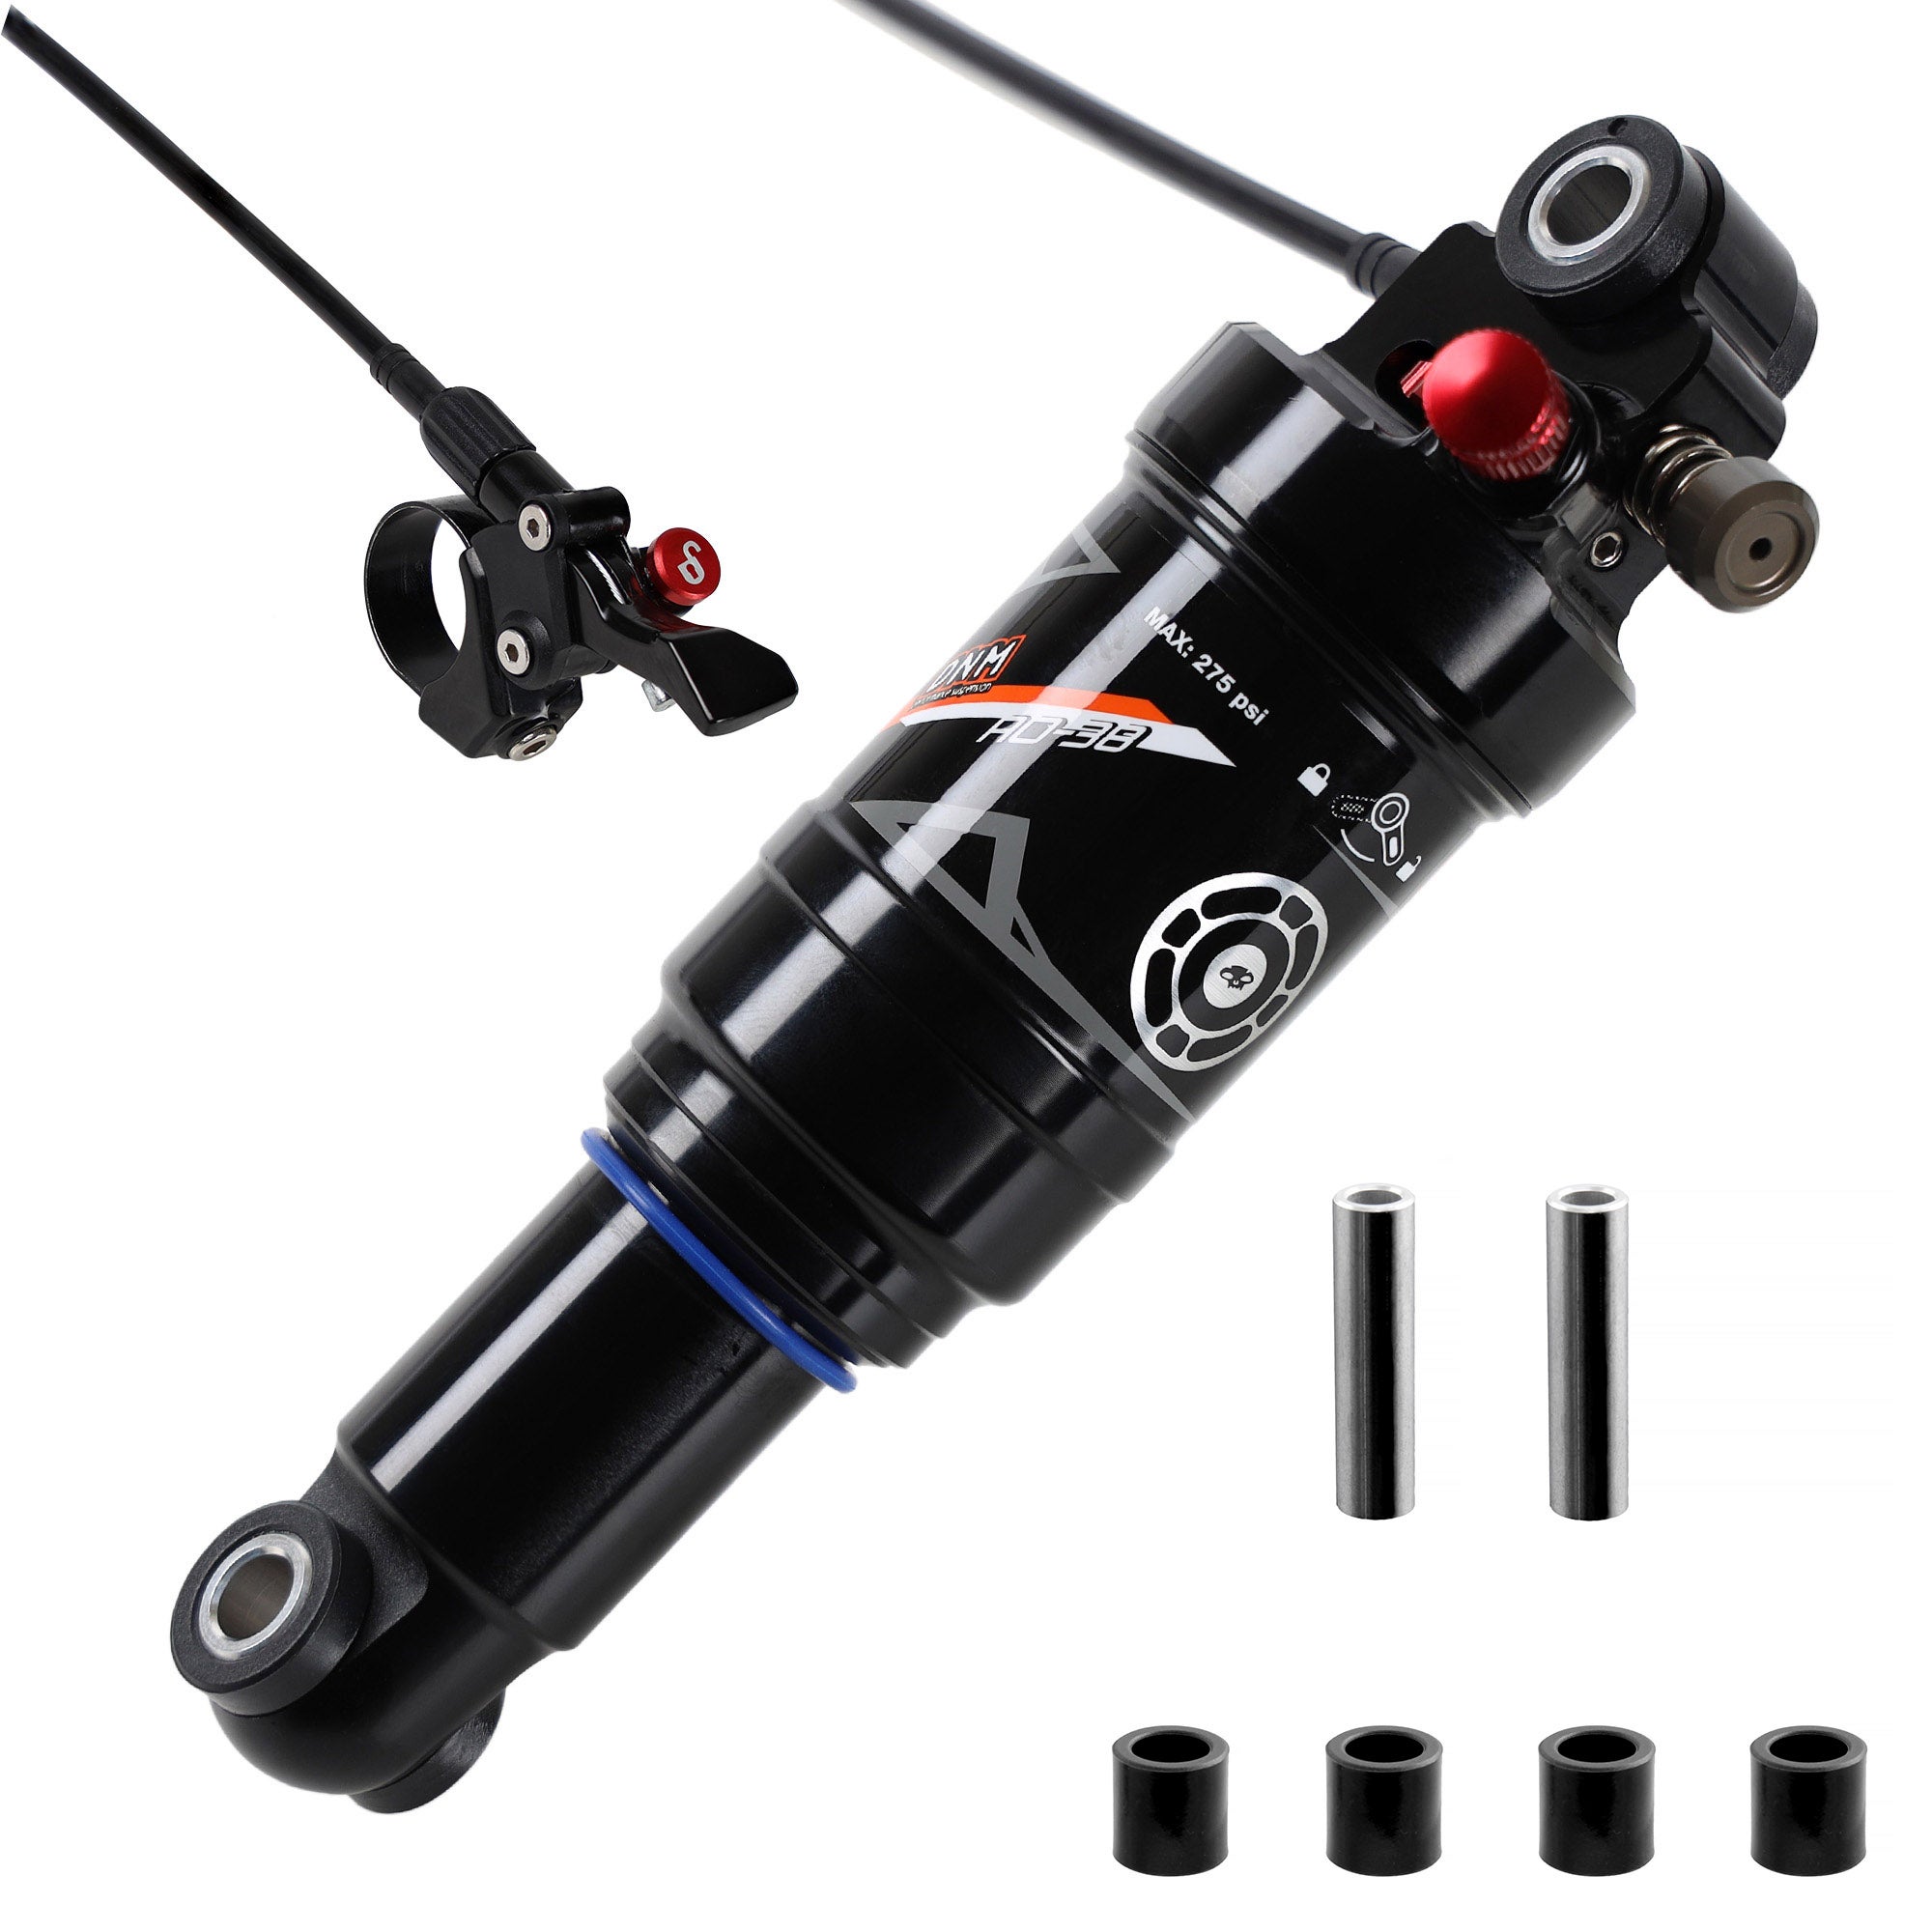 DNM AO-38RL Mountain Bike Air Rear Shock With Remote Lockout